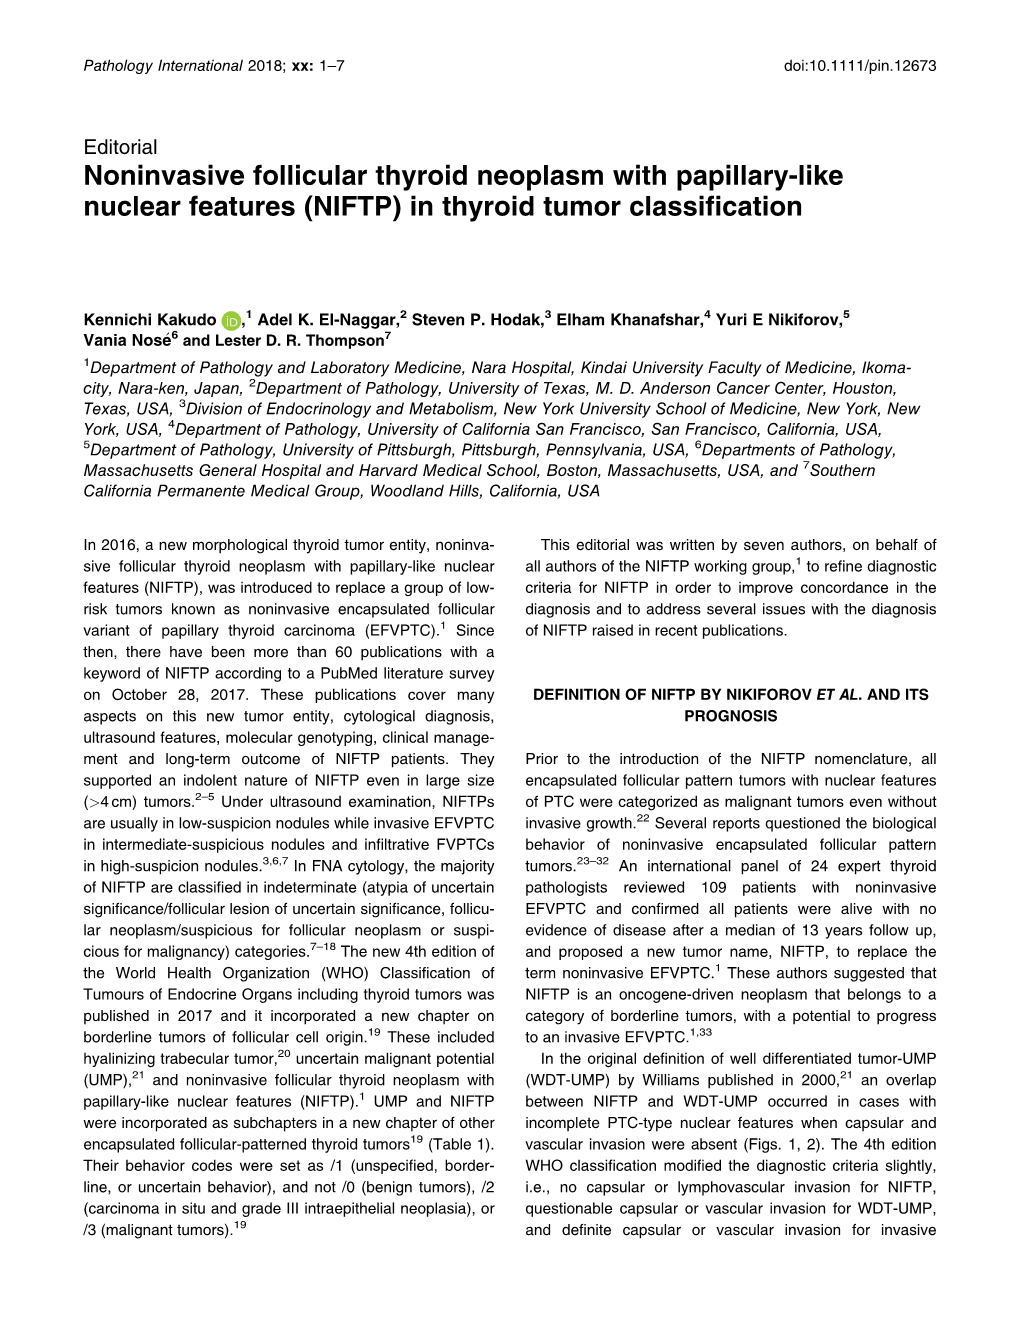 Noninvasive Follicular Thyroid Neoplasm with Papillary-Like Nuclear Features (NIFTP) in Thyroid Tumor Classification